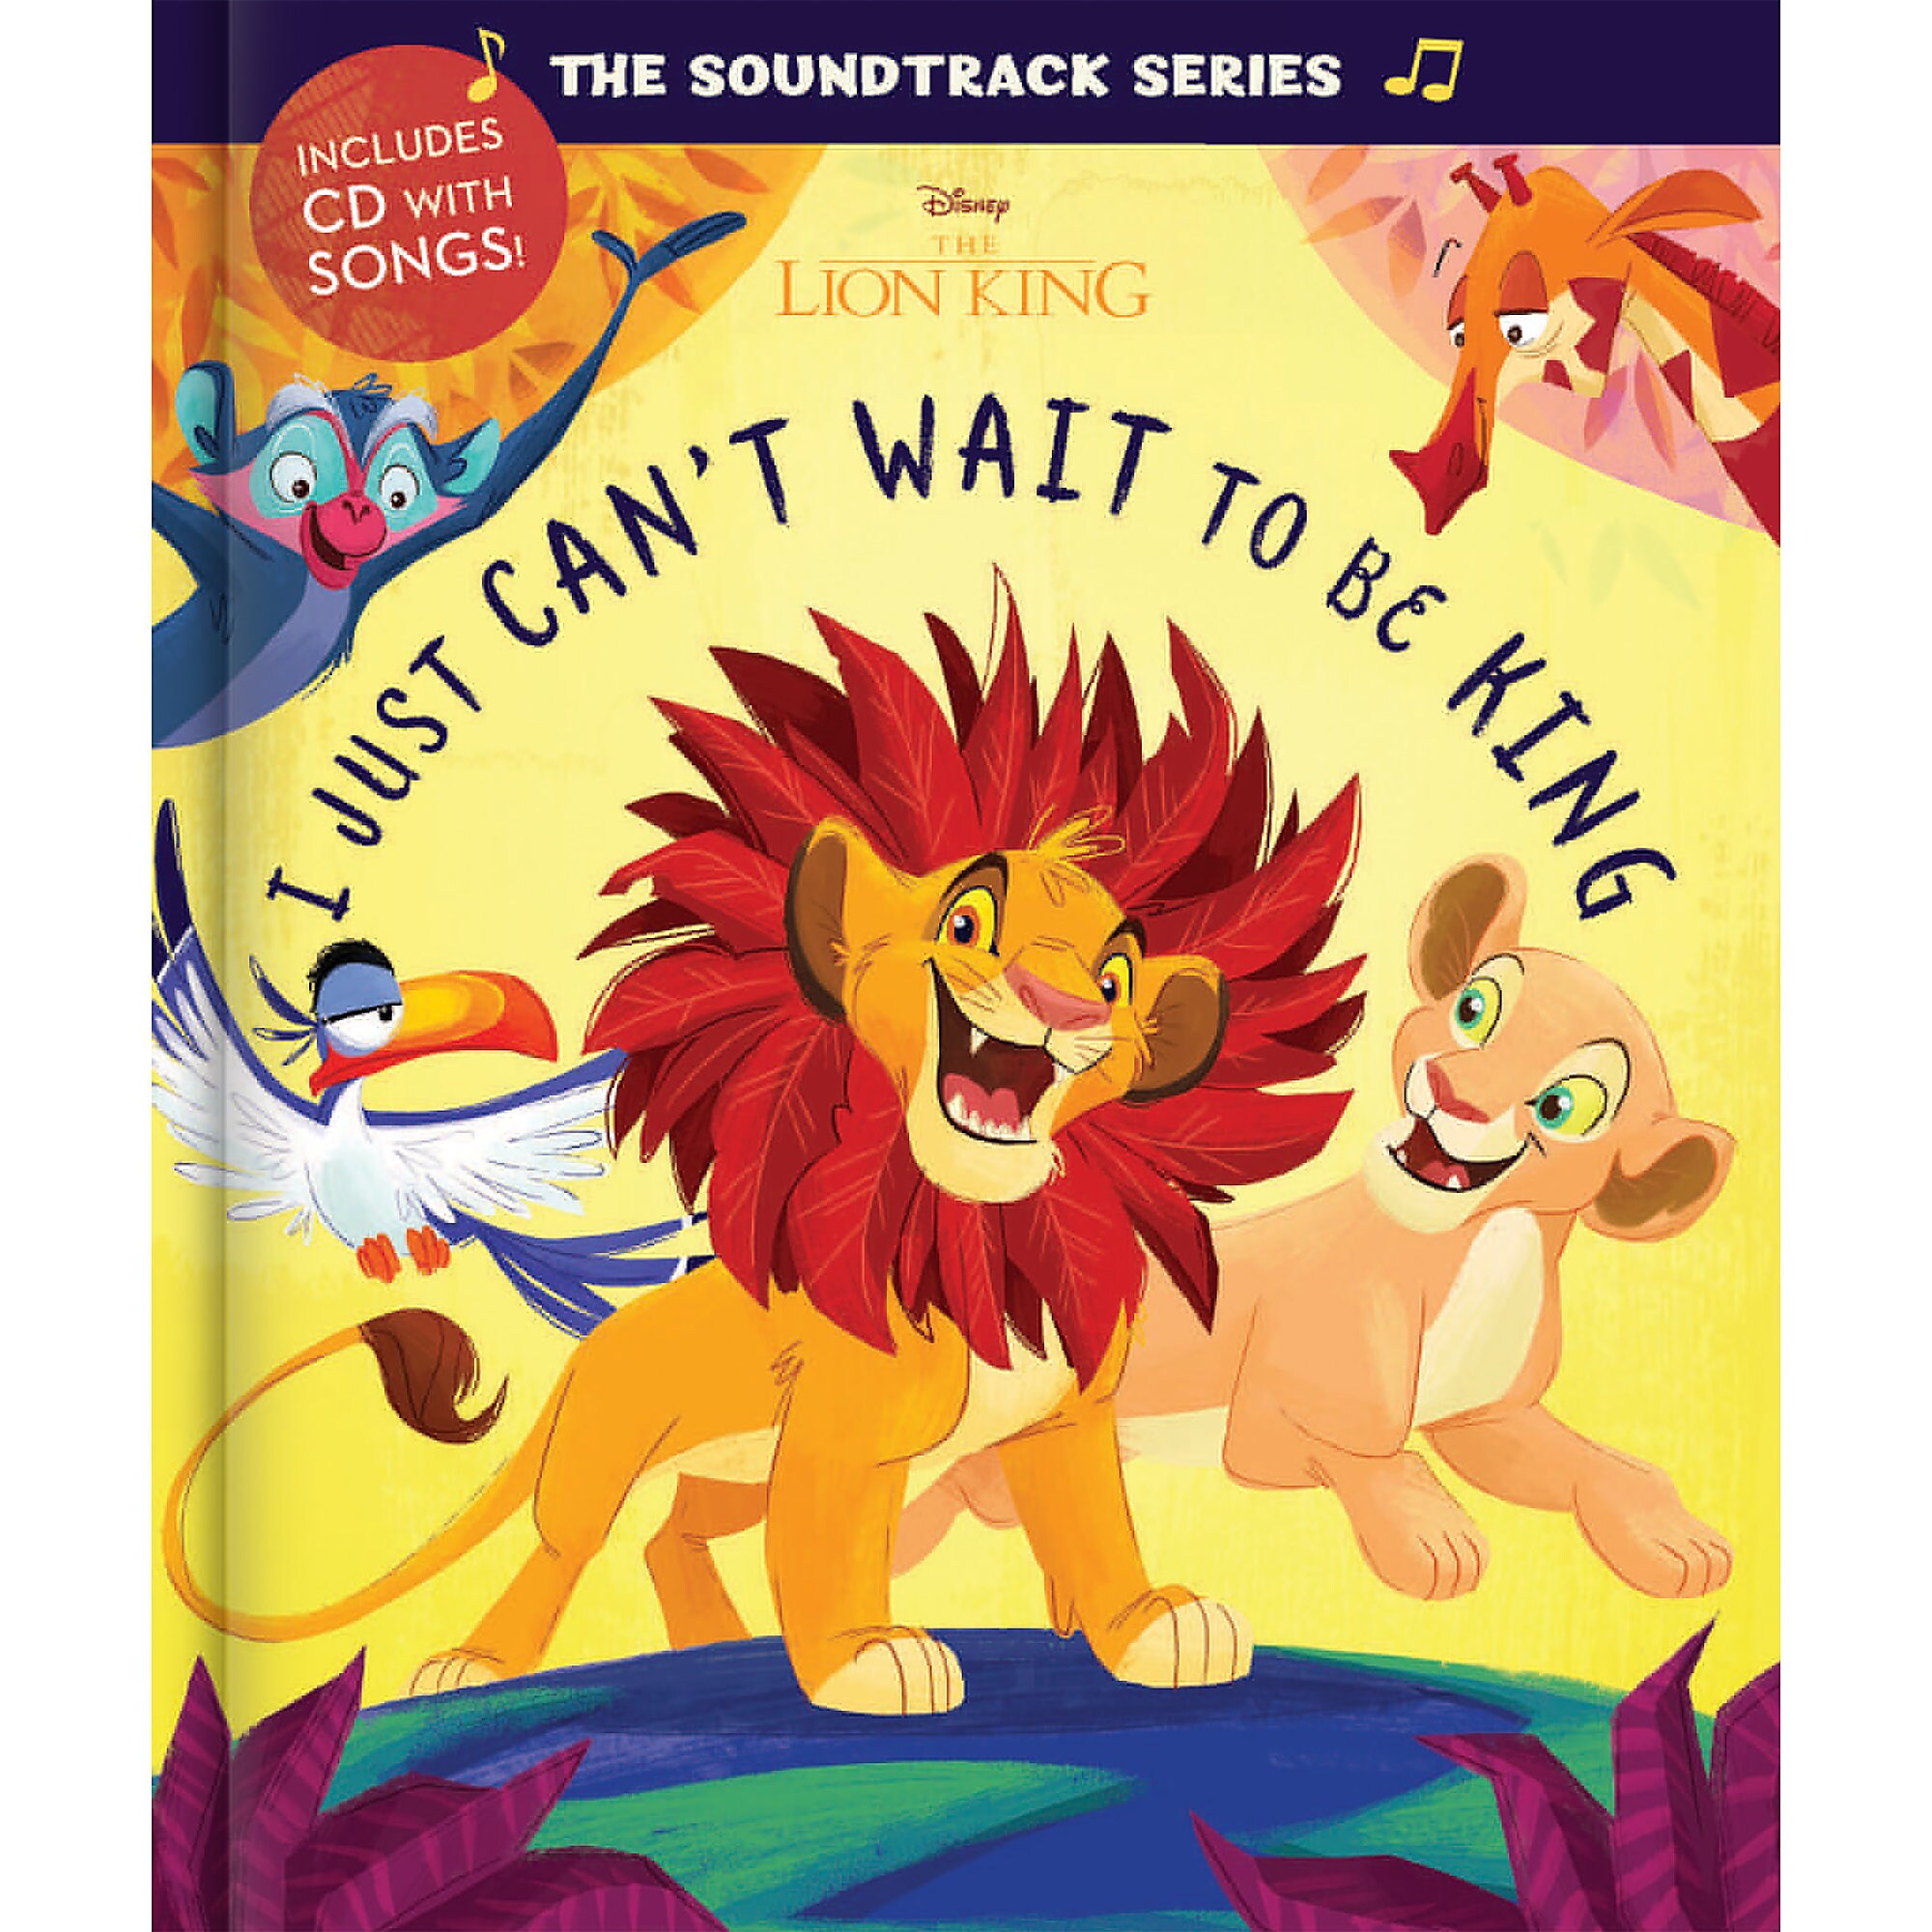 The Lion King: I Just Can't Wait to Be King - The Soundtrack Series